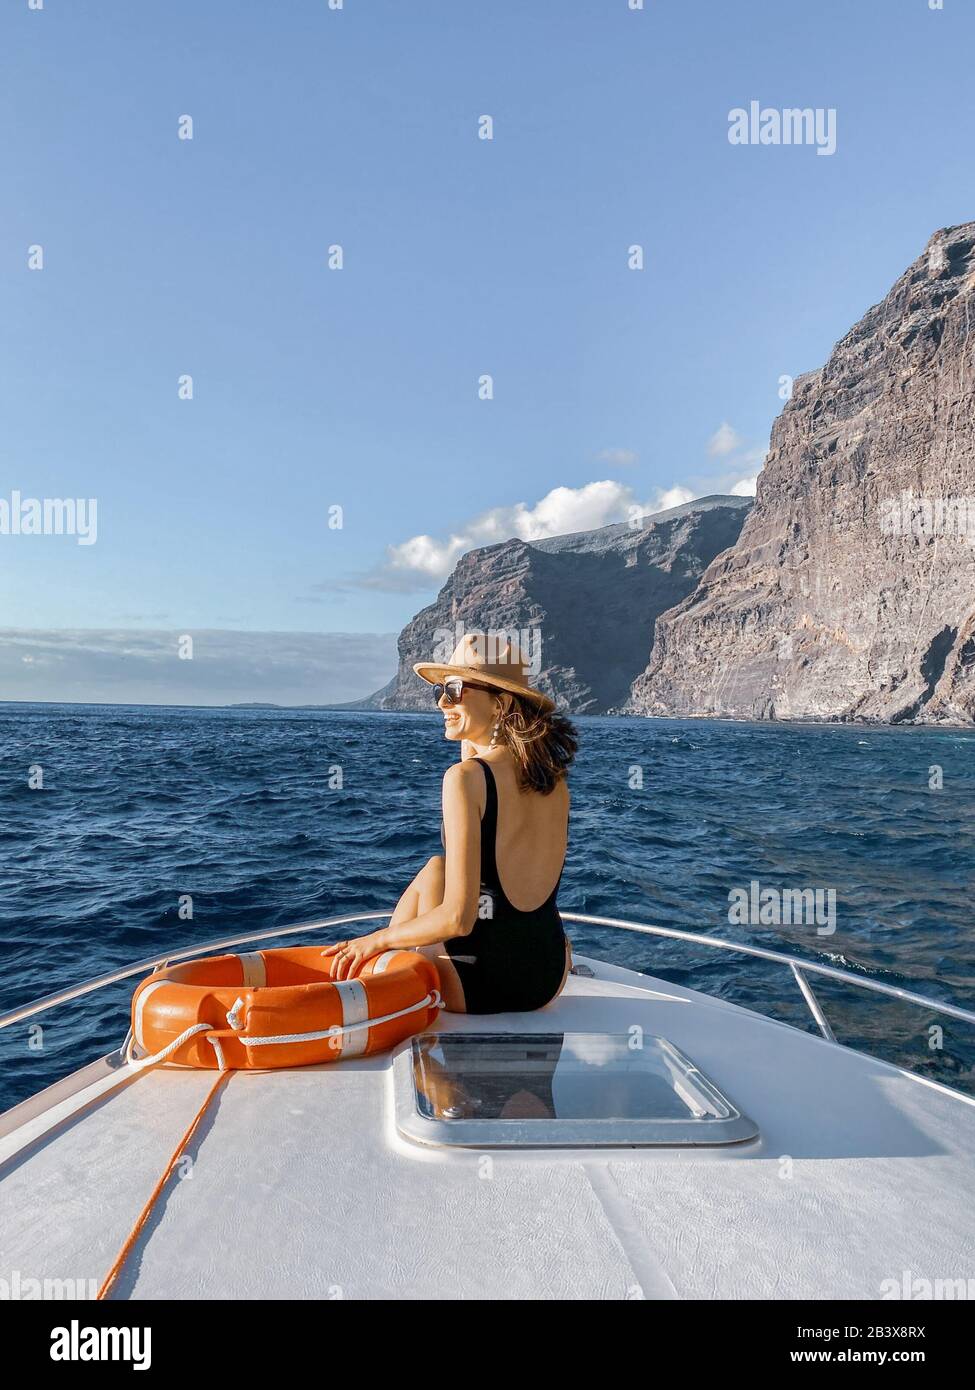 Woman enjoying ocean voyage sitting with lifebuoy on the yacht nose while sailing near the breathtaking rocky coast on a sunset. Image made on mobile phone Stock Photo